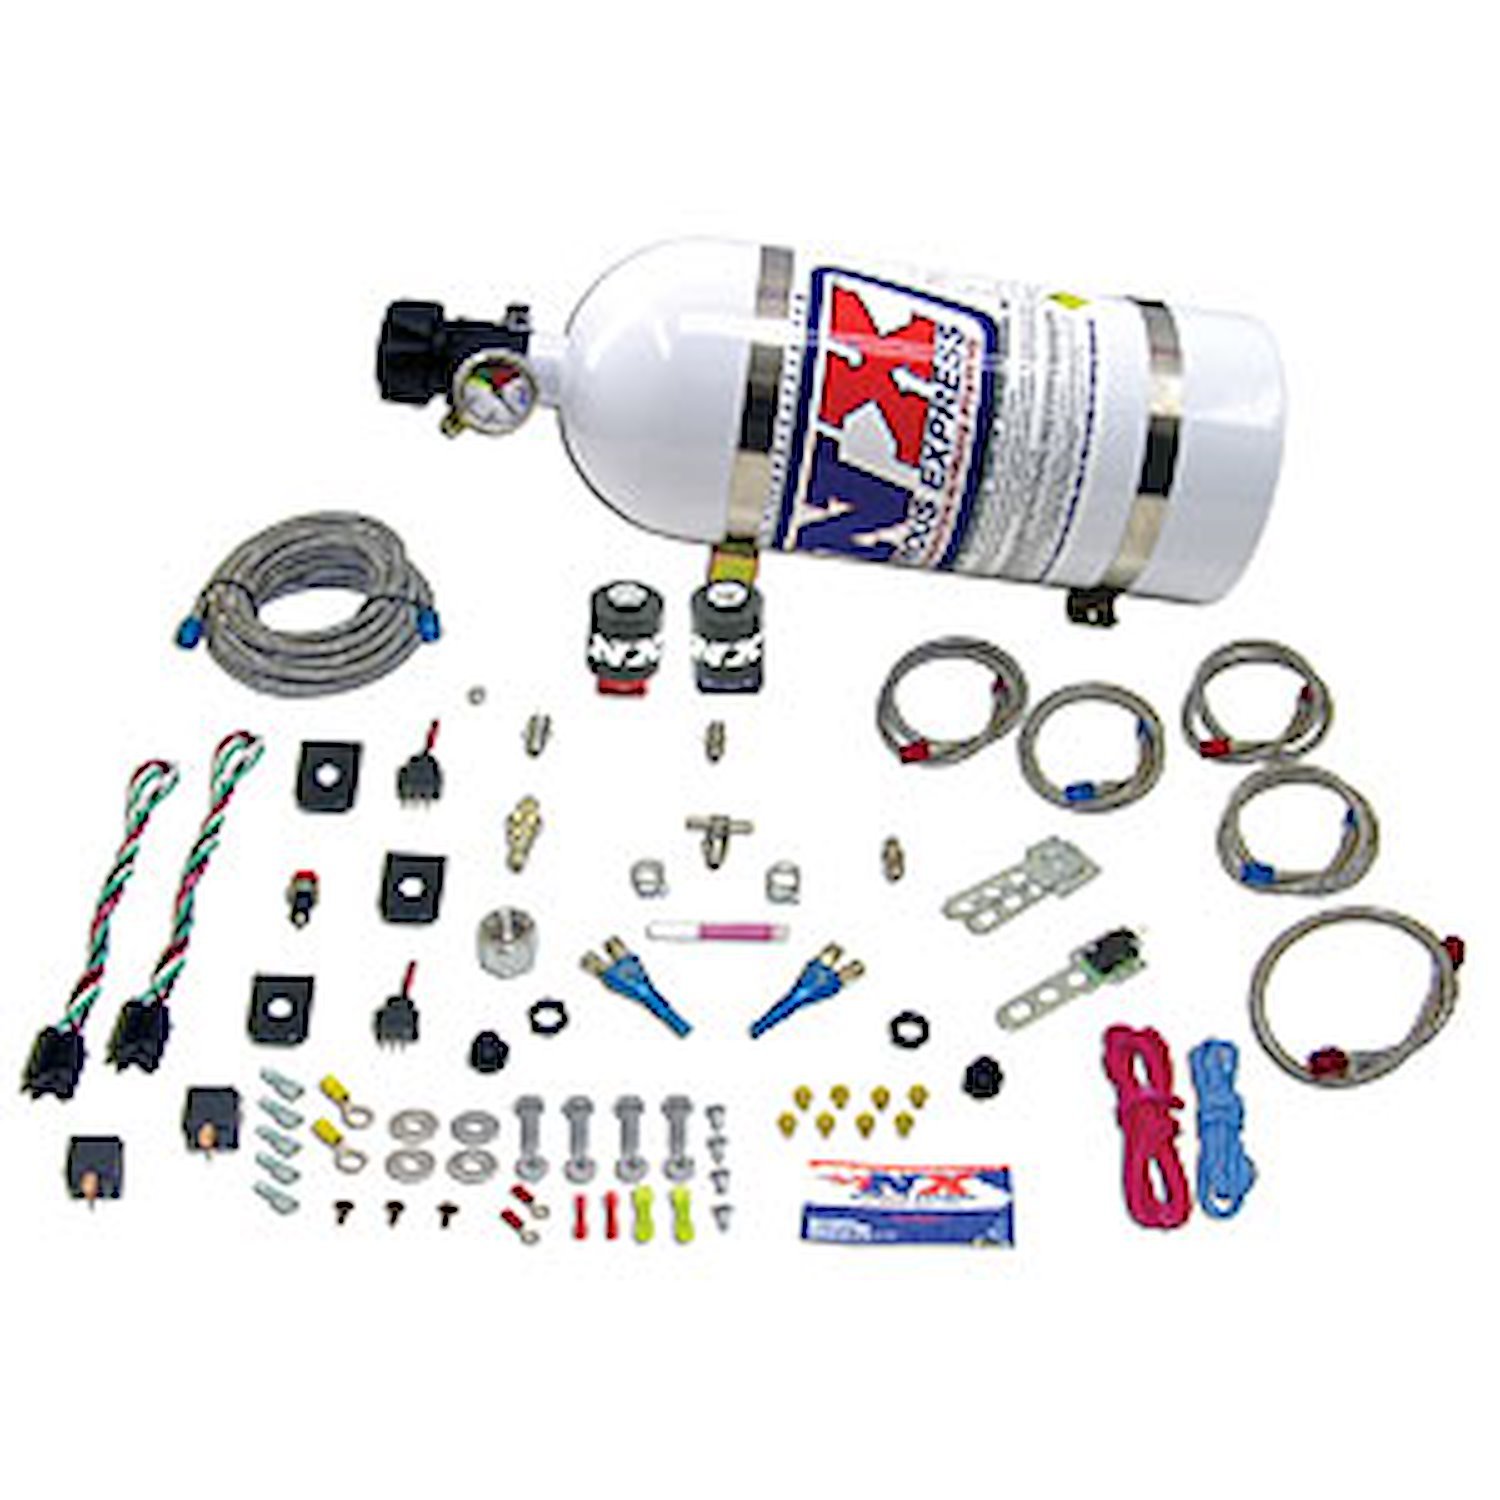 GM TBI ALL (50-75-100-125HP) WITH 12 LB. COMPOSITE BOTTLE